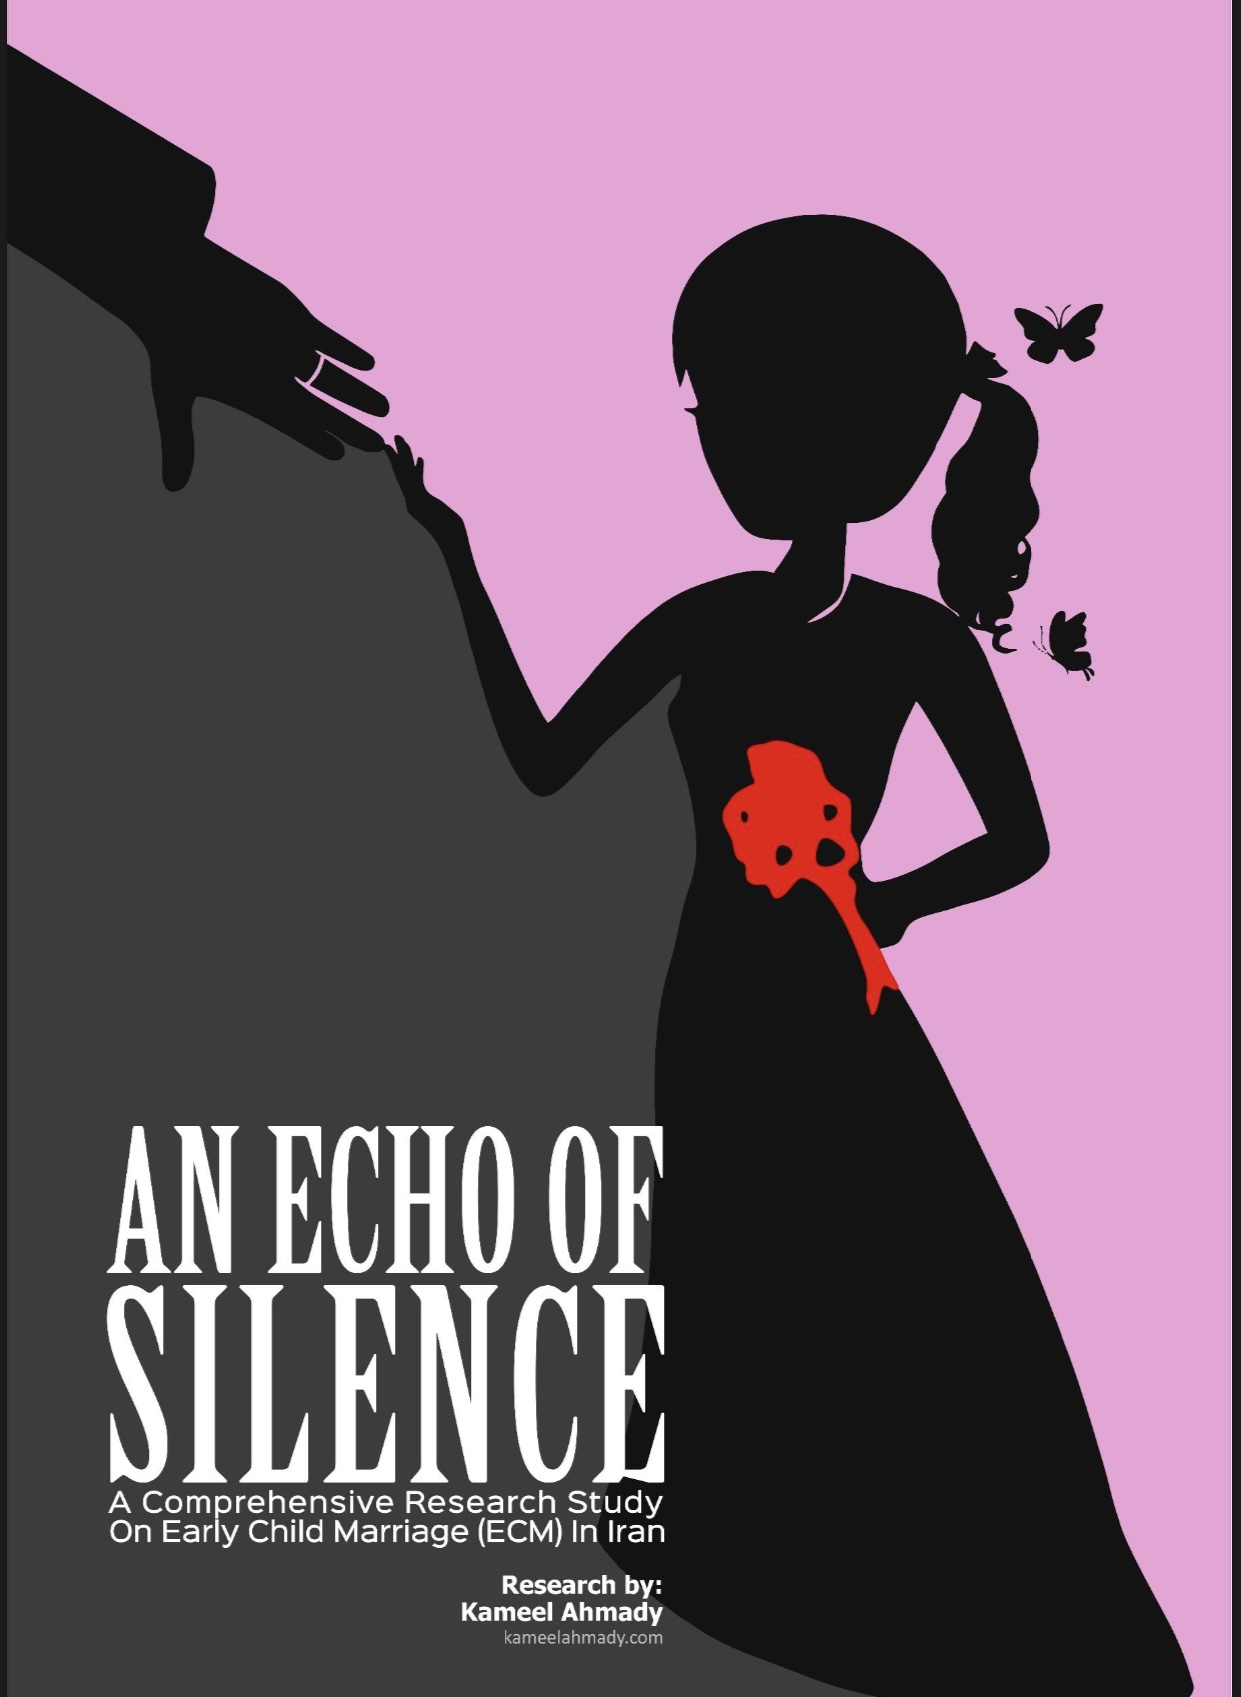 An Echo of Silence: A Comprehensive Research Study on Early Child Marriage - PDF